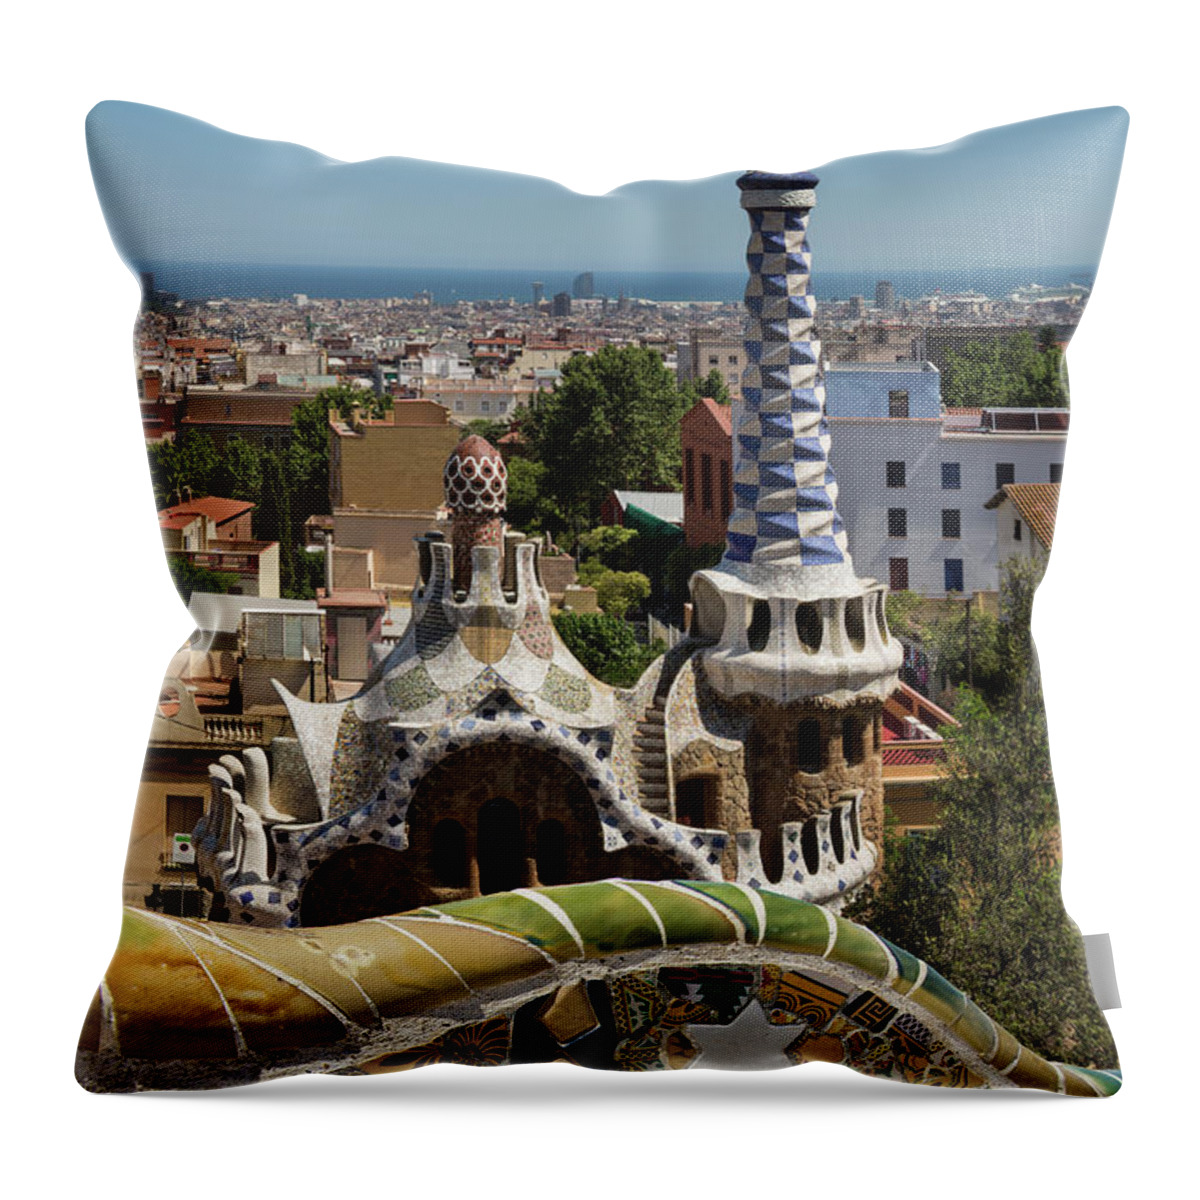 Catalonia Throw Pillow featuring the photograph Parc Guell - Barcelona - Spain by Steve Allen